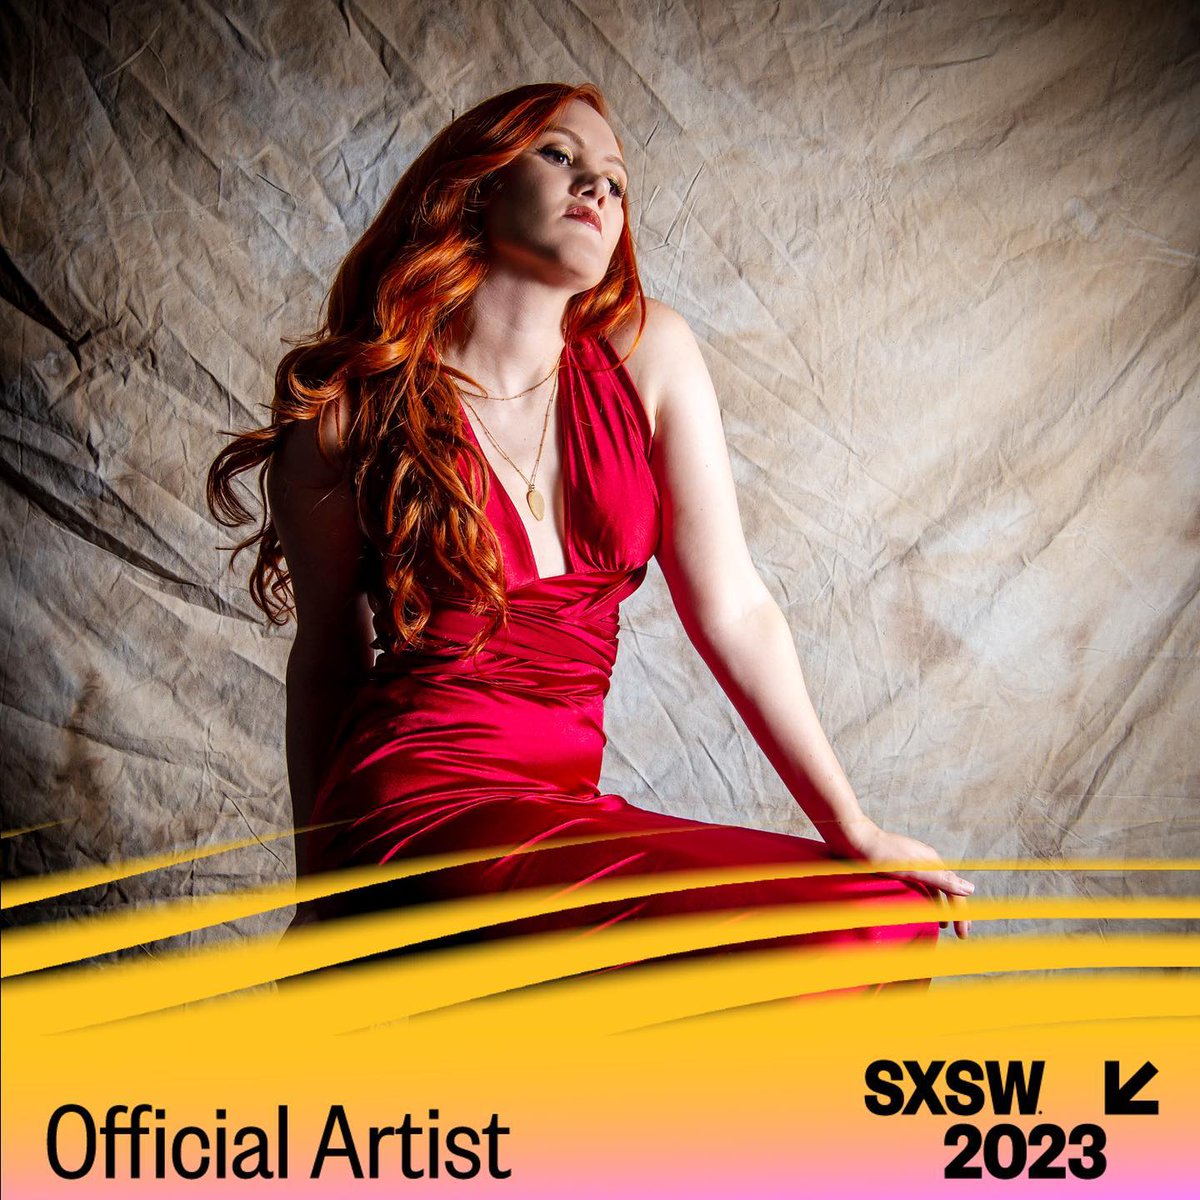 #ICYMI The talented @GracePettis is an Official Artist for @SXSW 2023!! 🎶